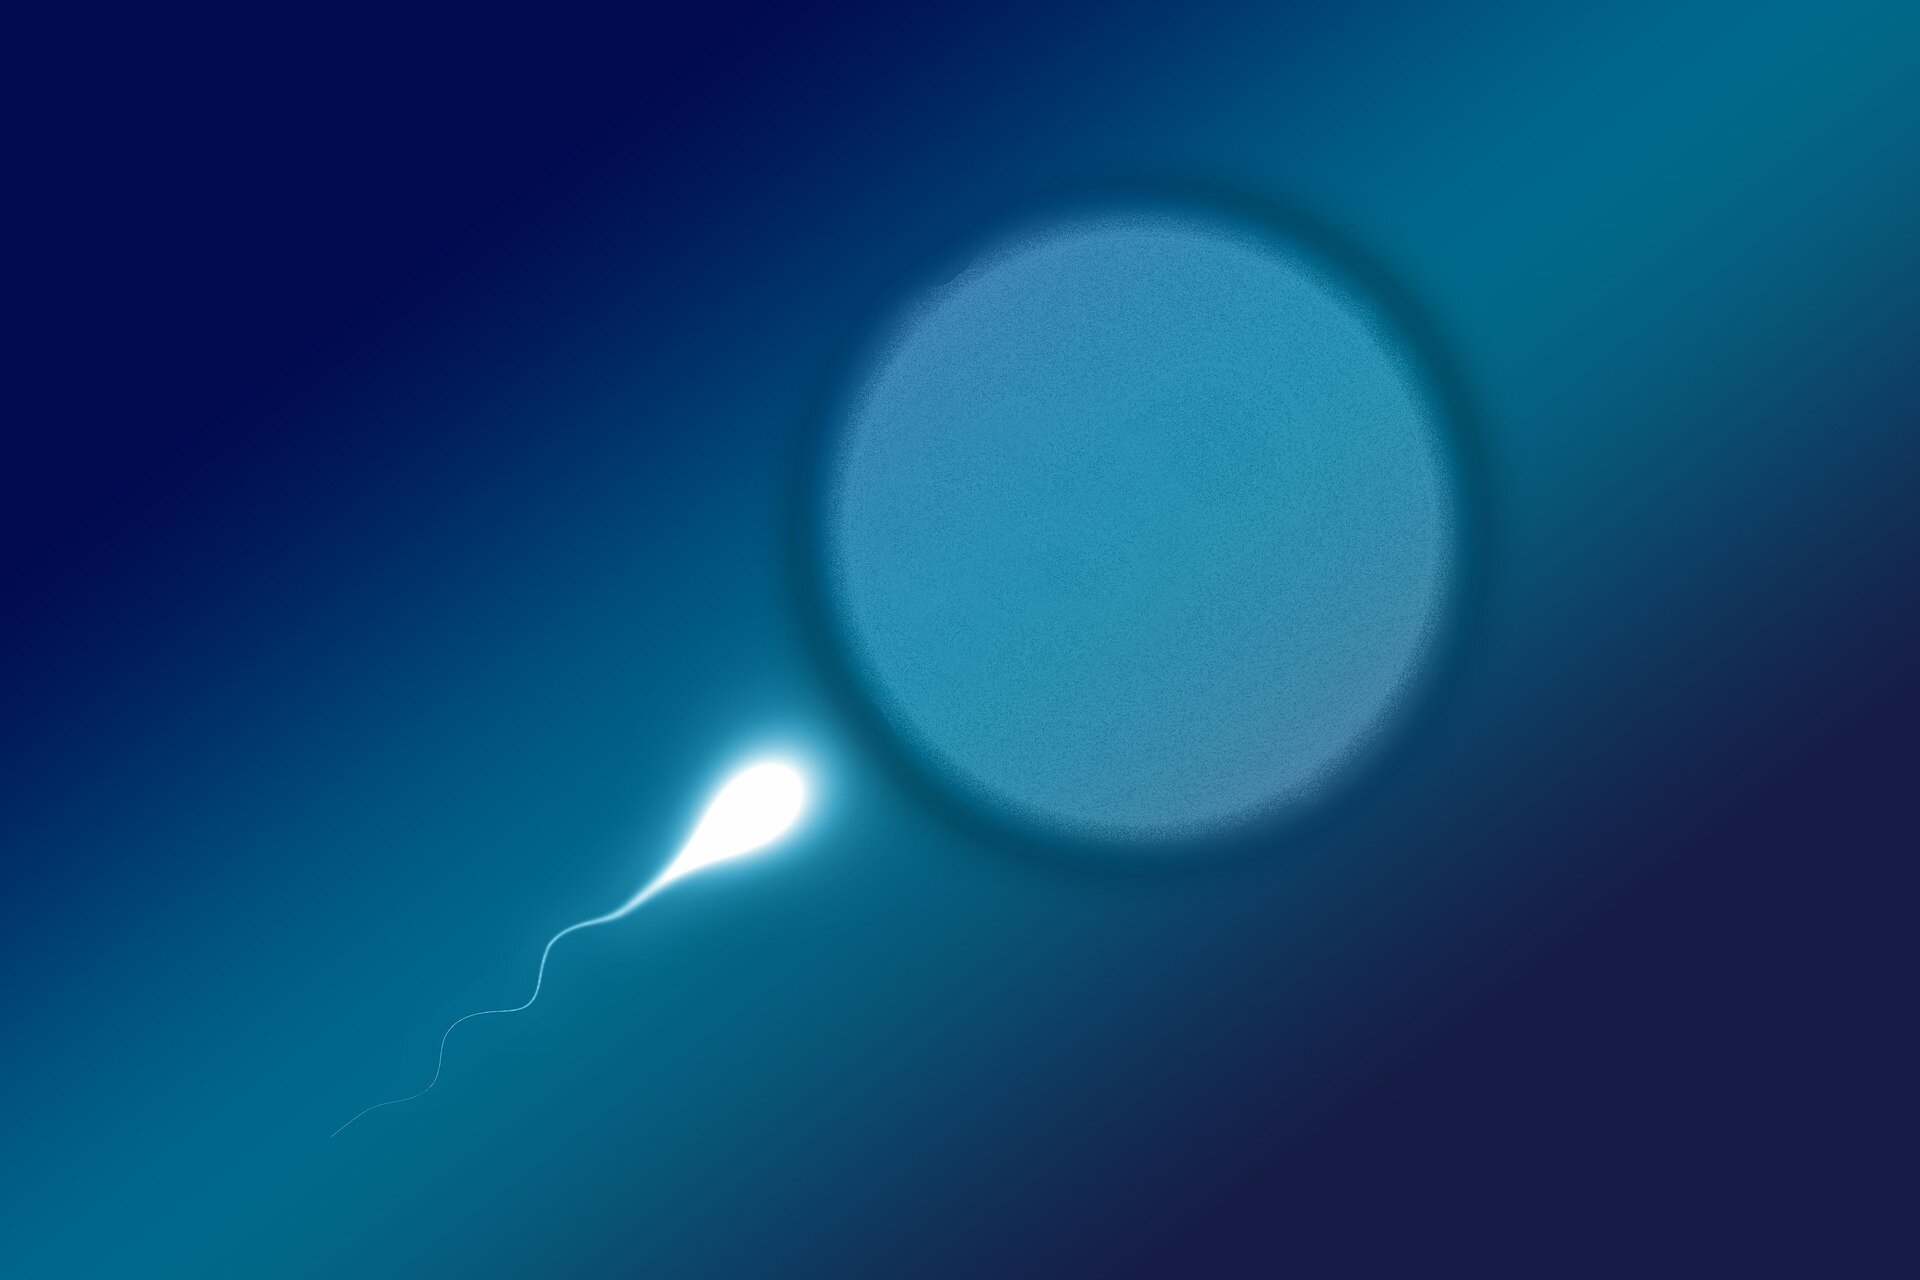 Modifications to amino acids in sperm could be behind infertility